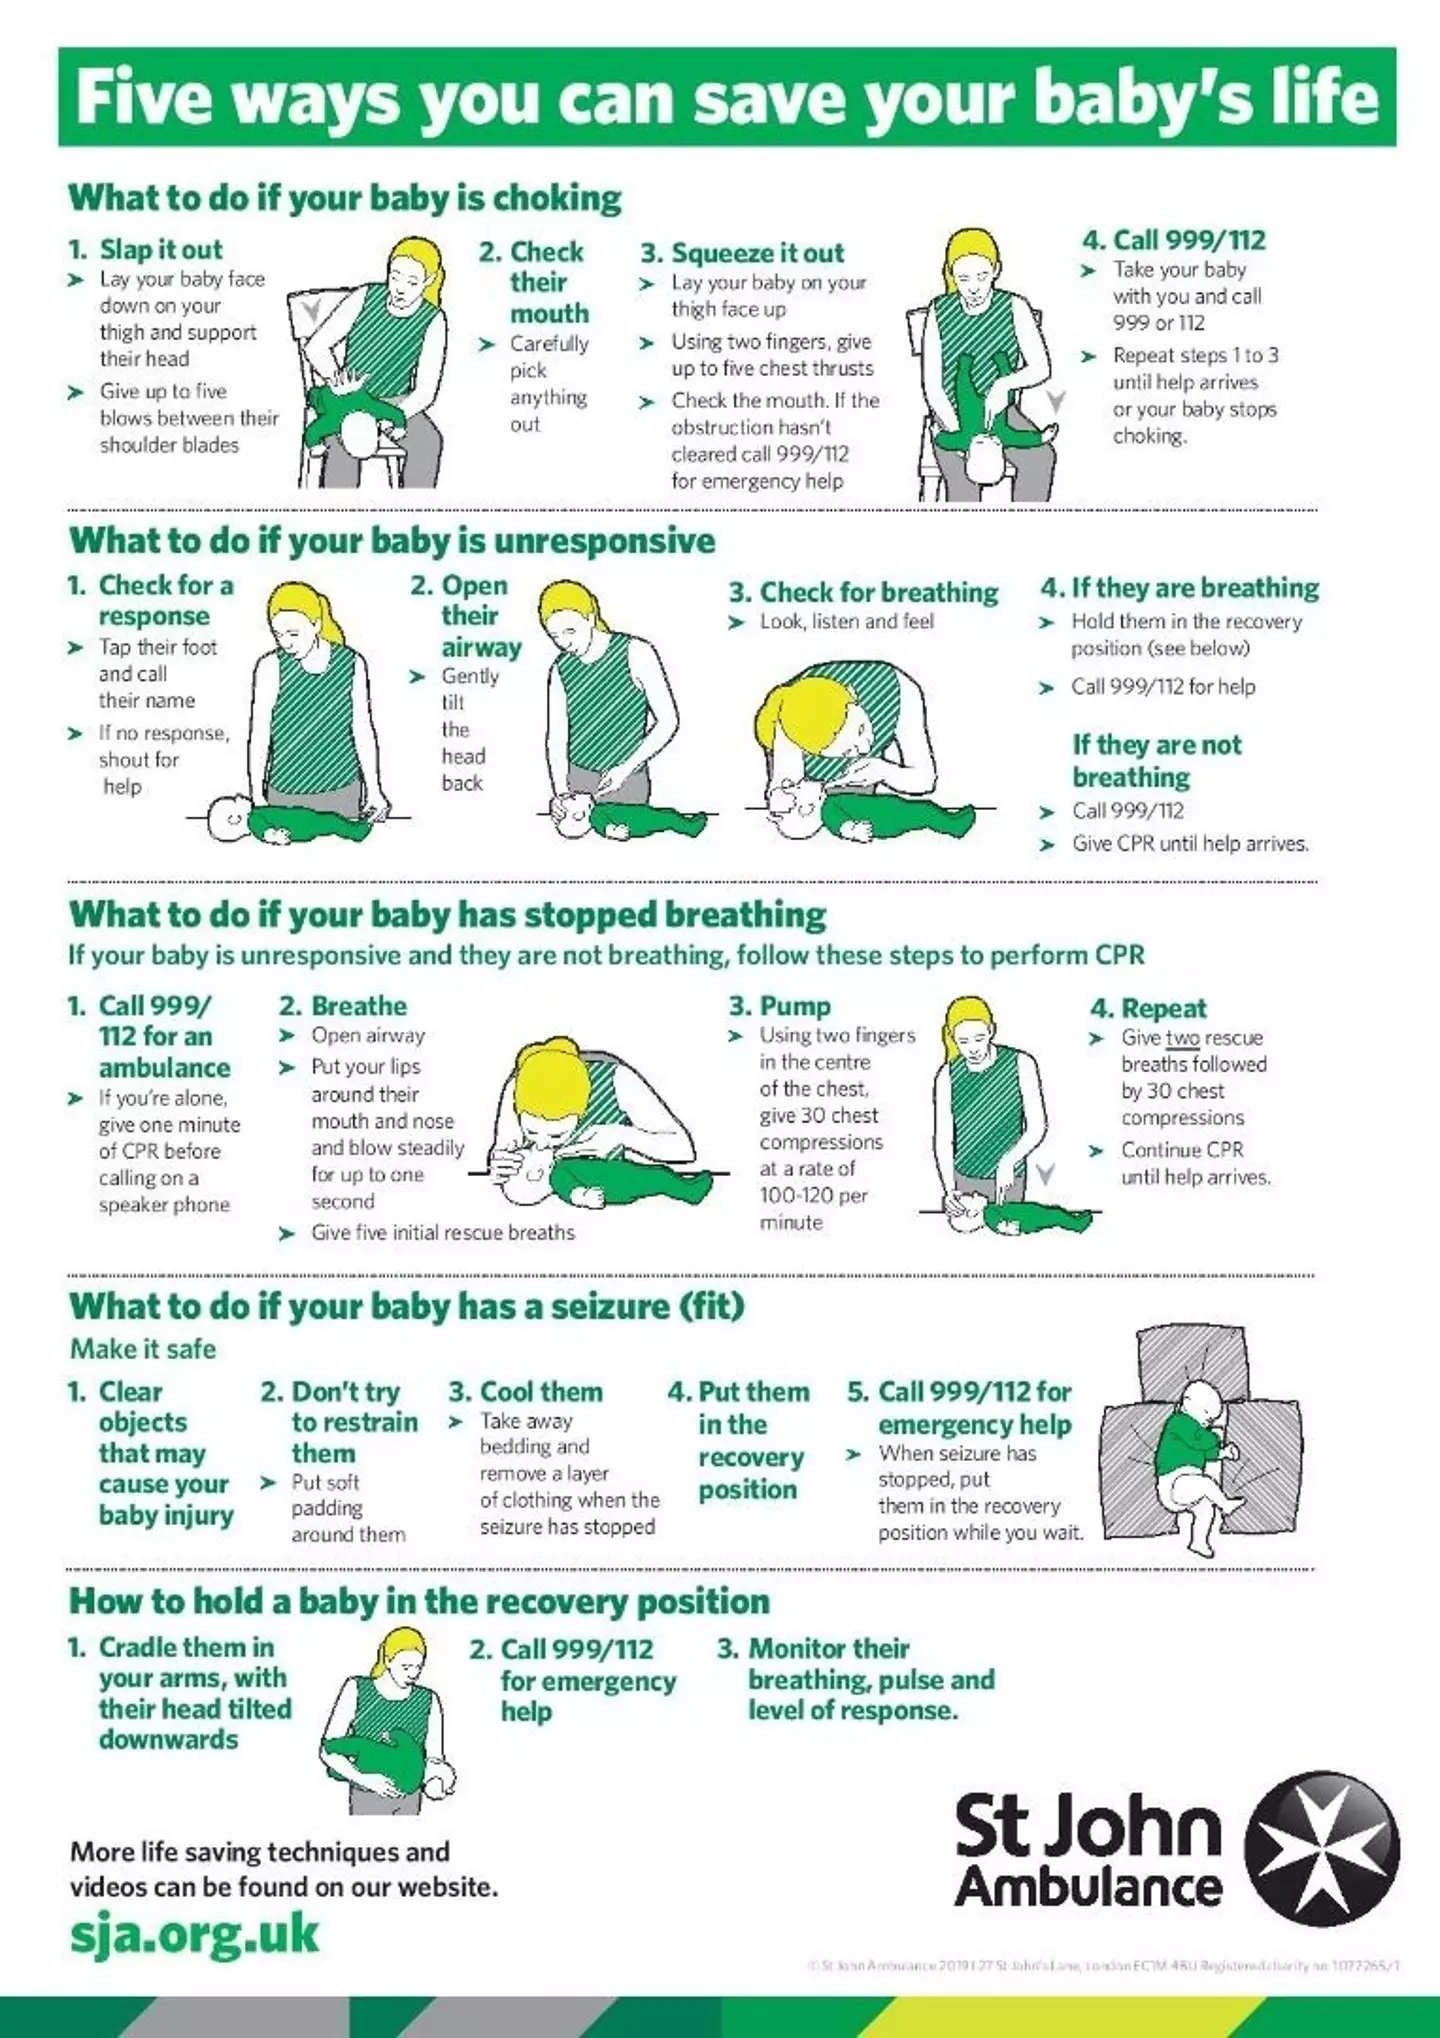 Use this diagram to guide you. (St John Ambulance)